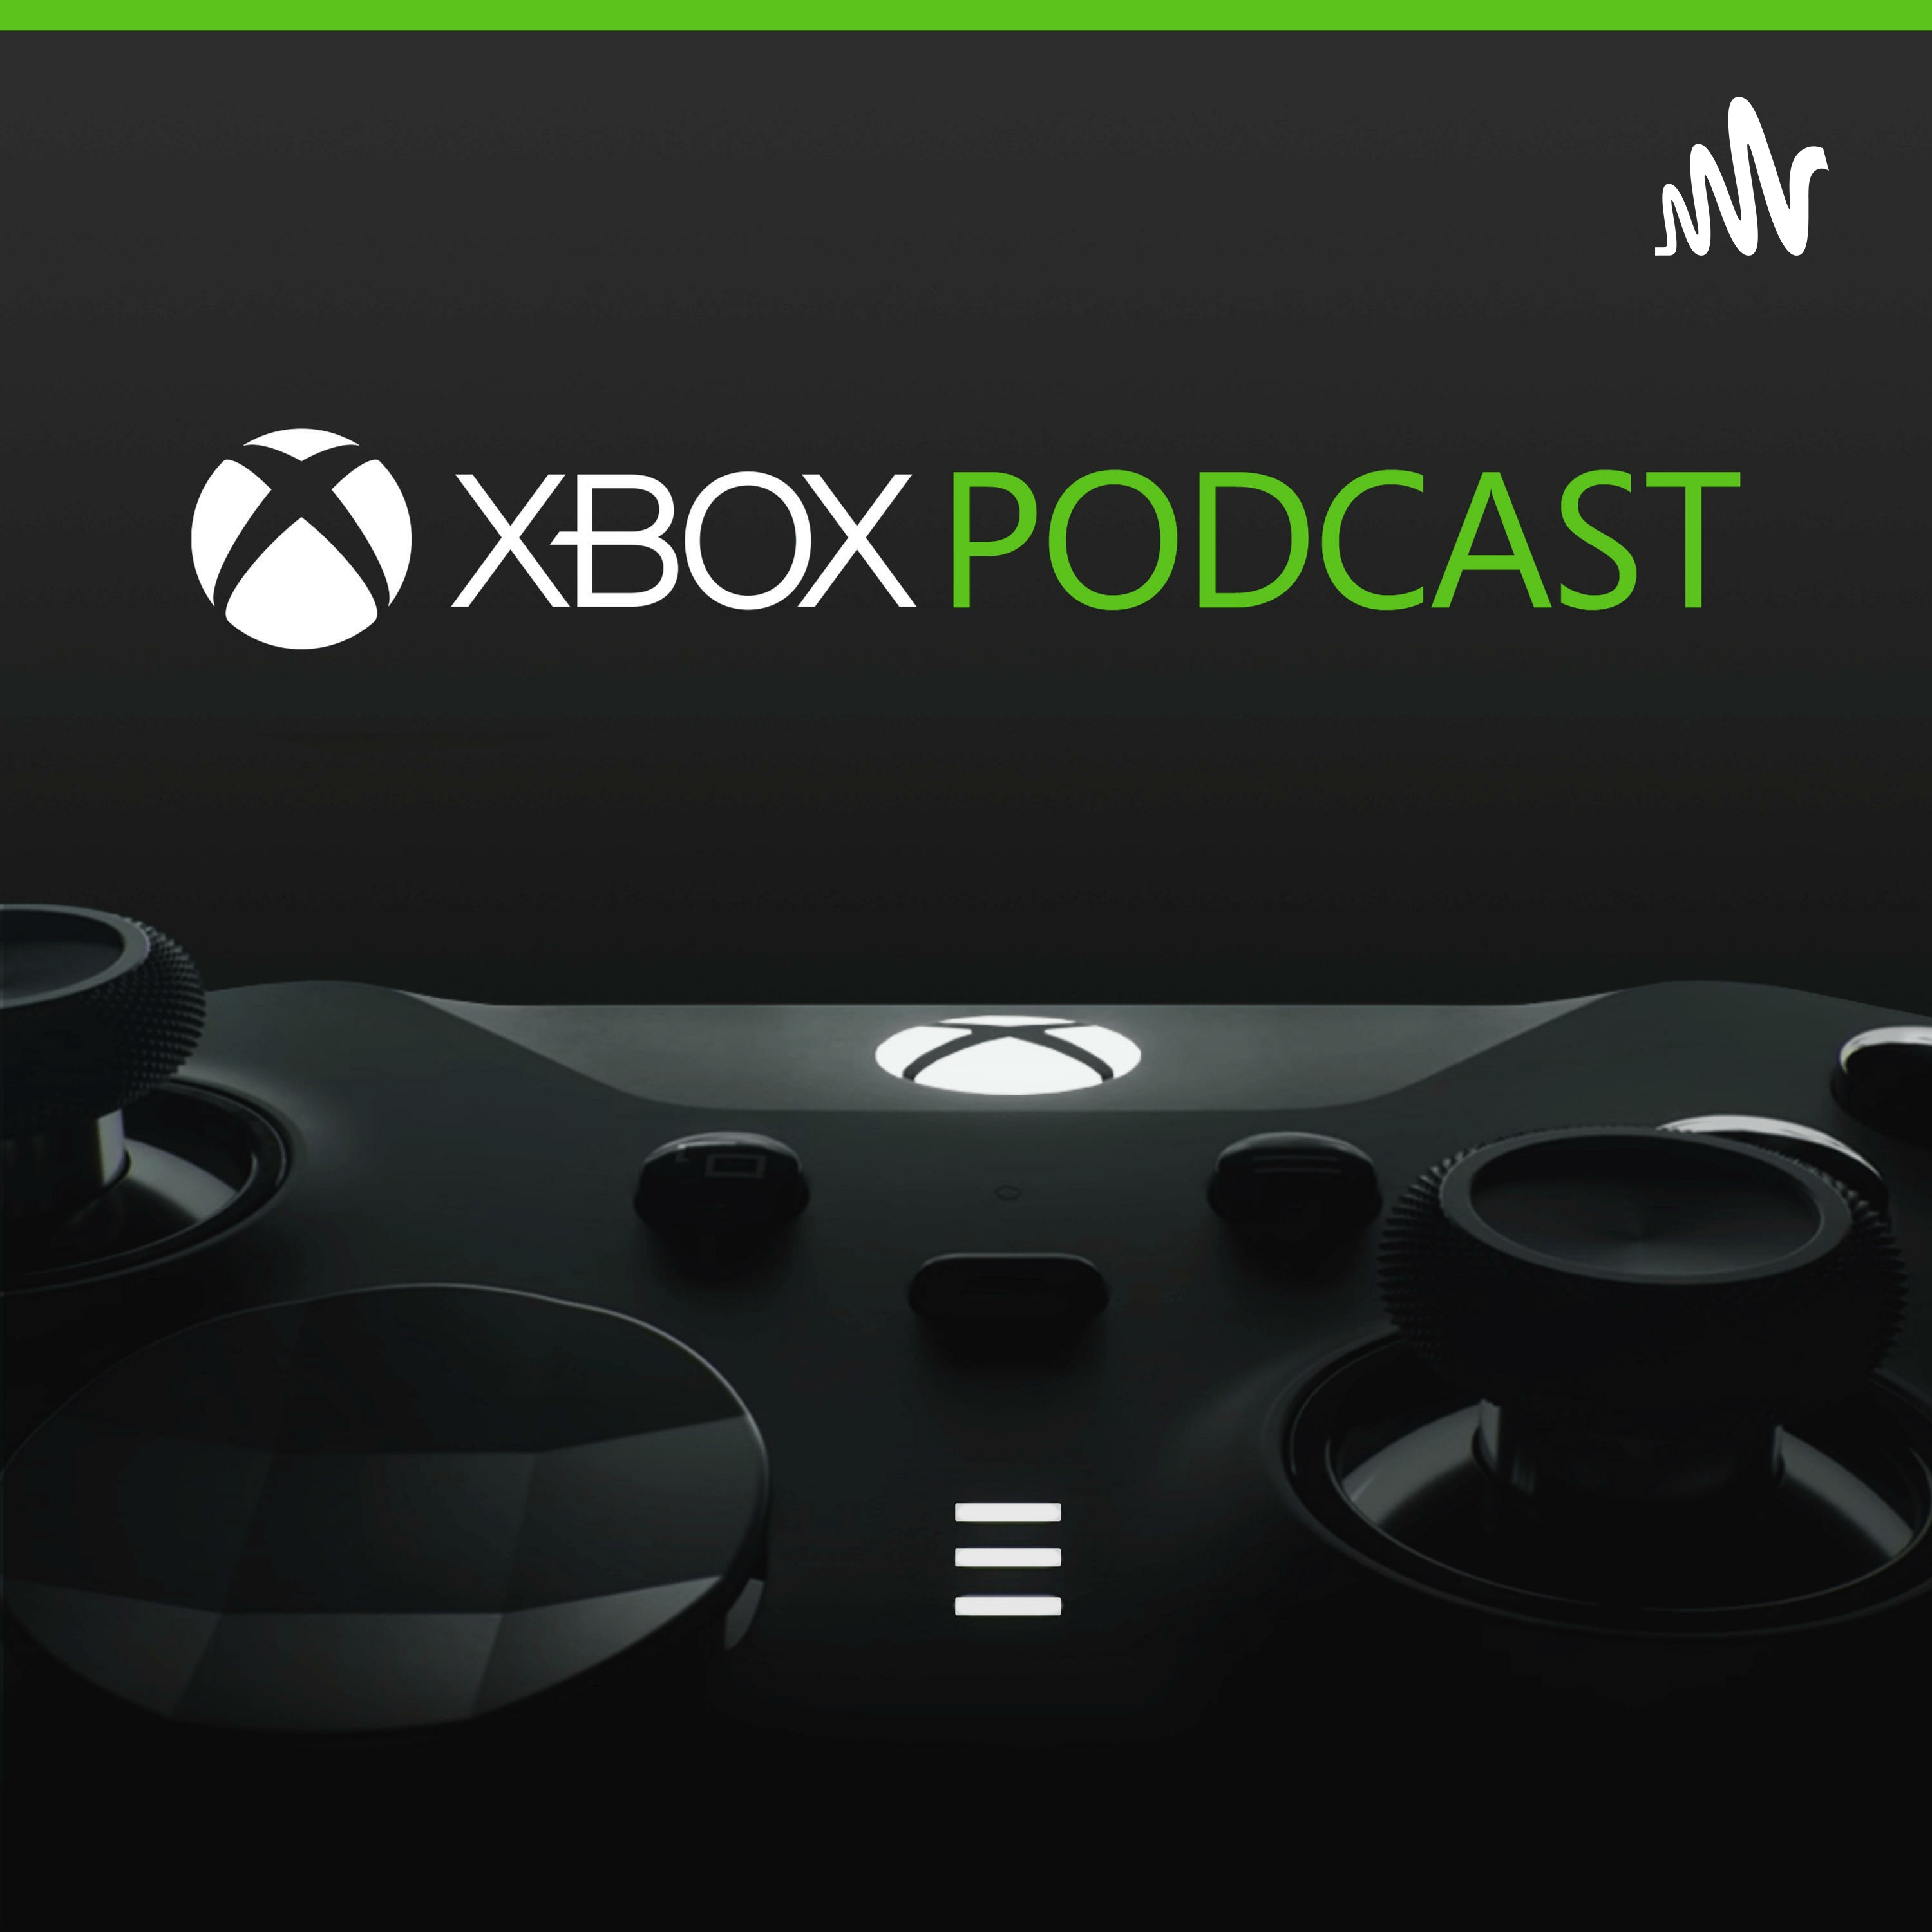 The Official Xbox Podcast